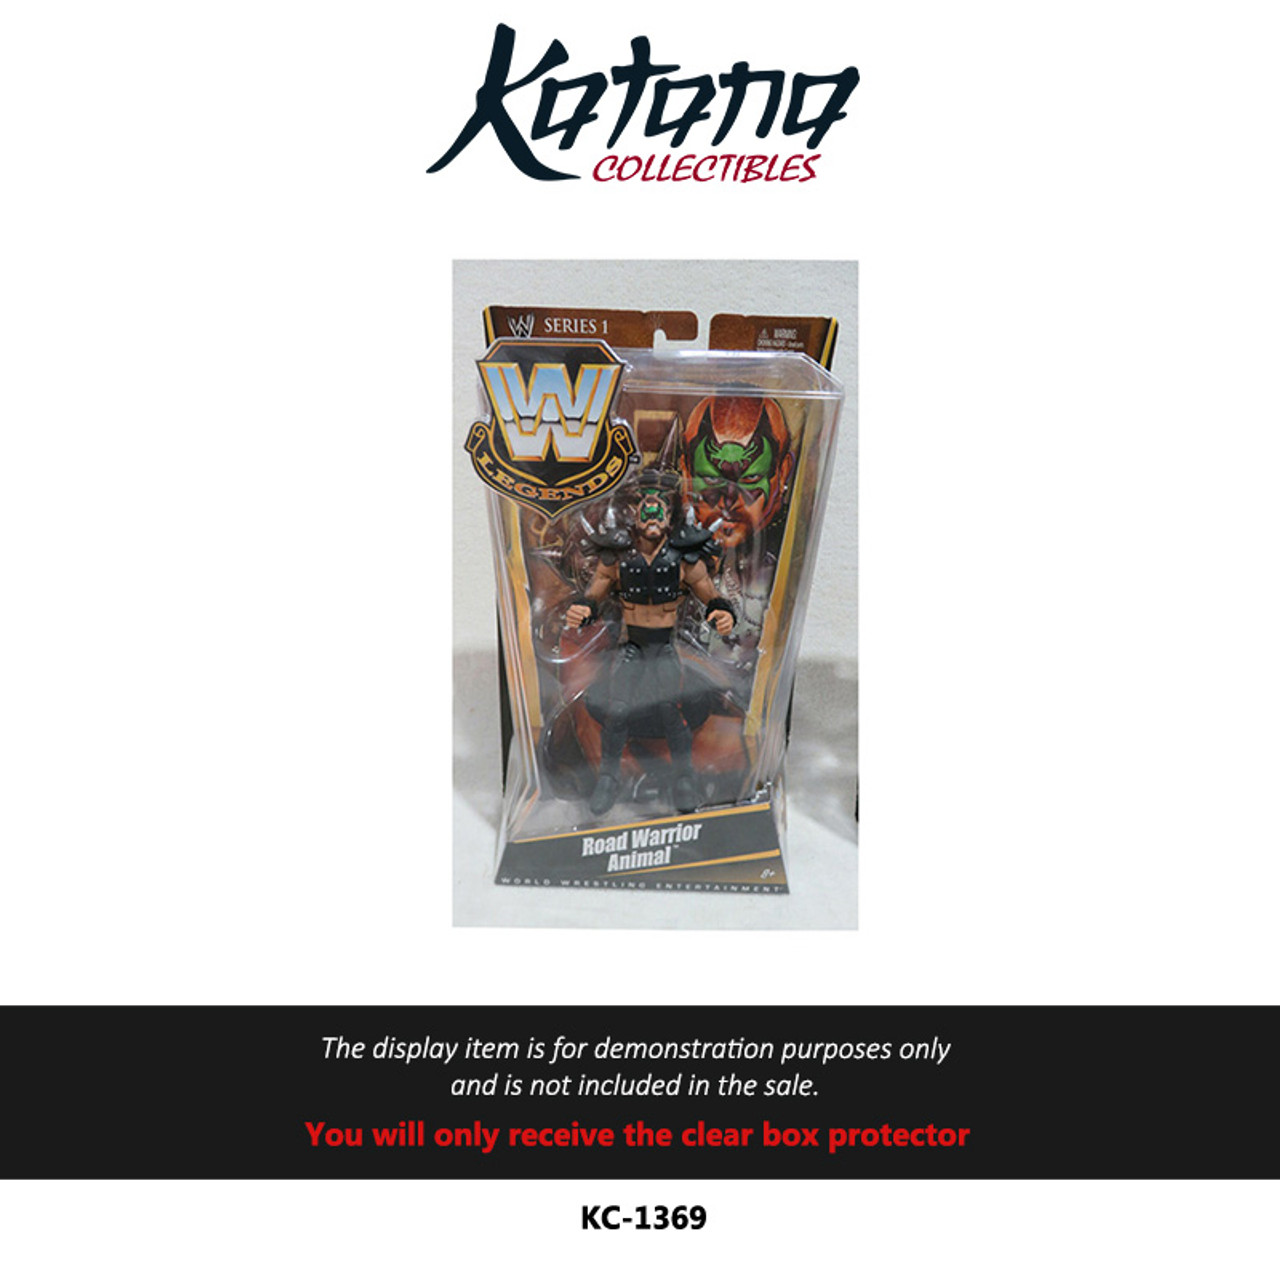 Katana Collectibles Protector For Mattel WWE Legends Series 1 - 3